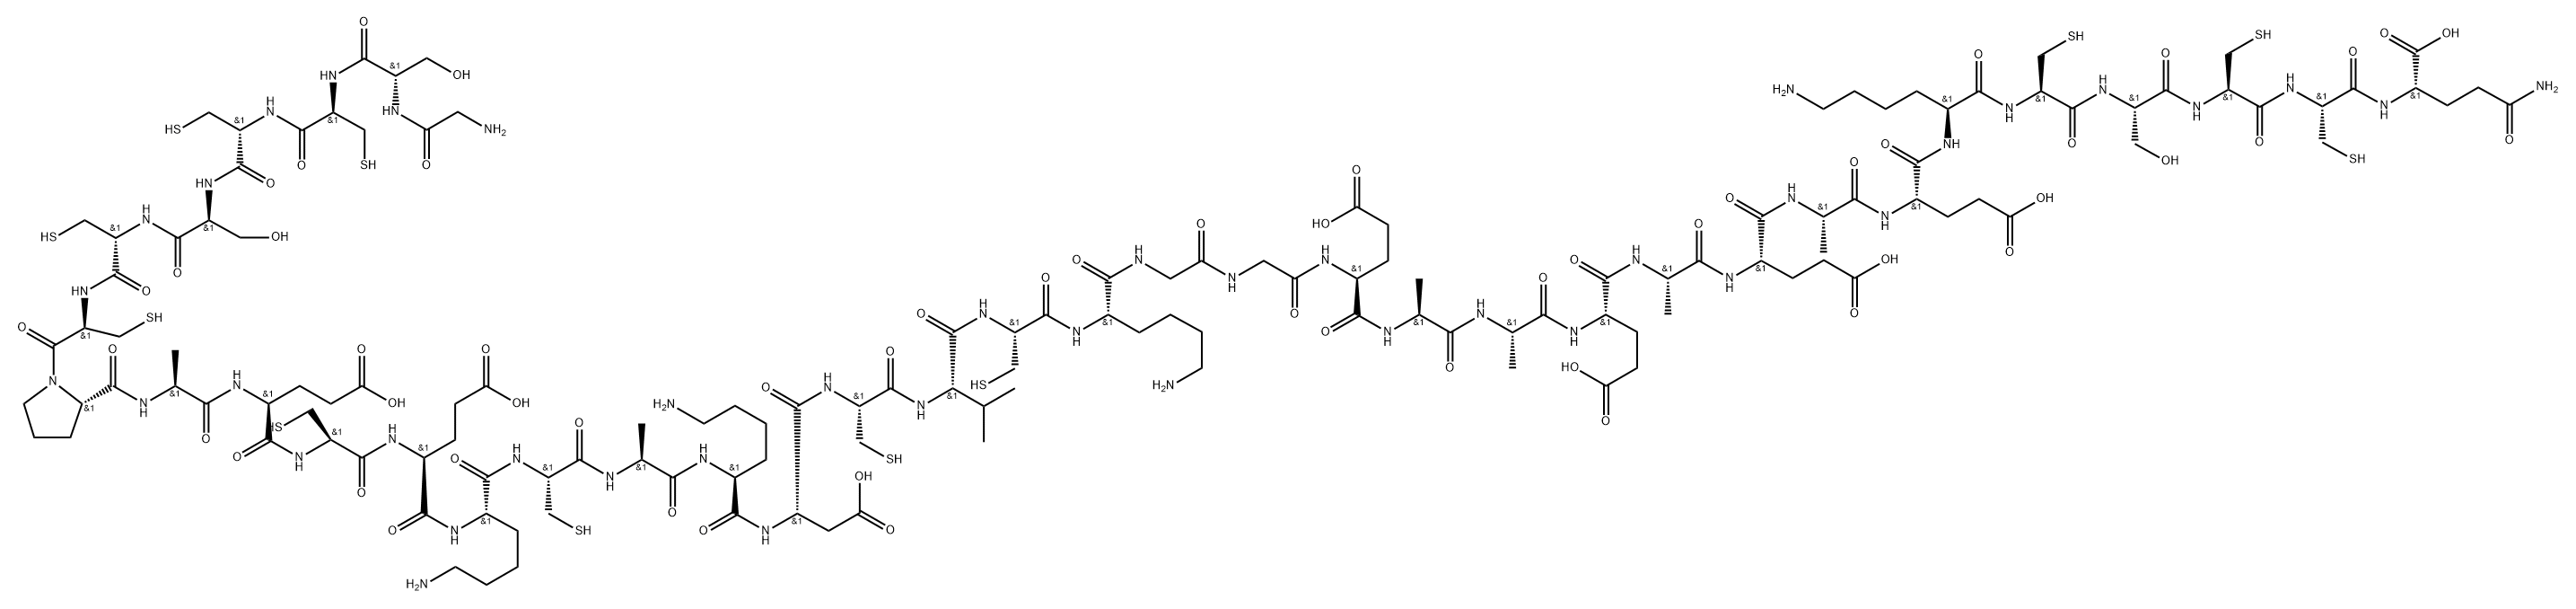 Recombinant human sulfhydryl peptide Structure